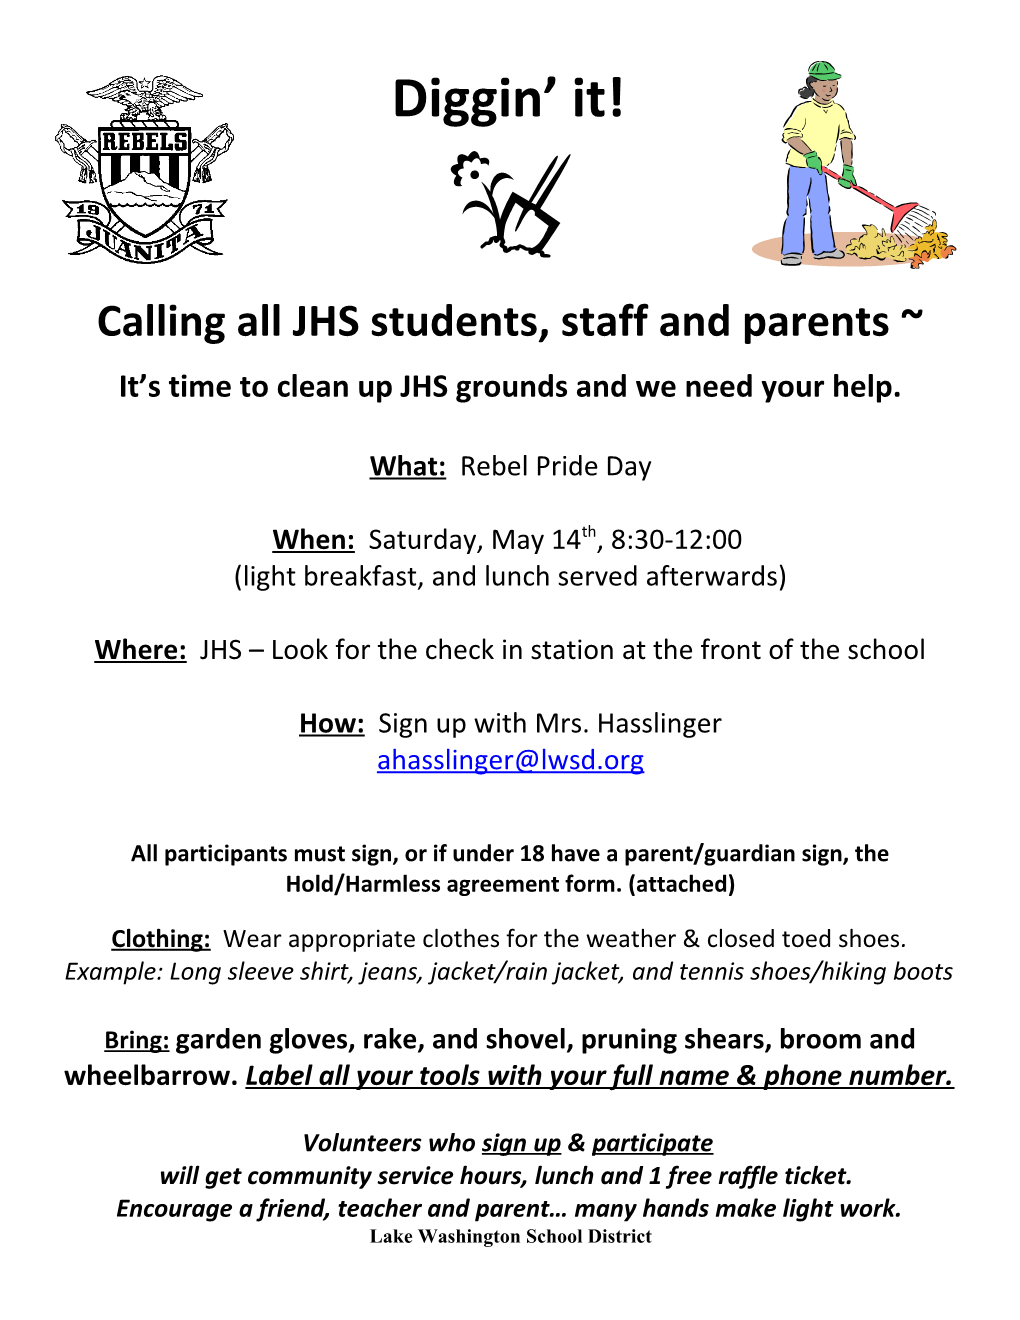 Calling All JHS Students, Staff and Parents